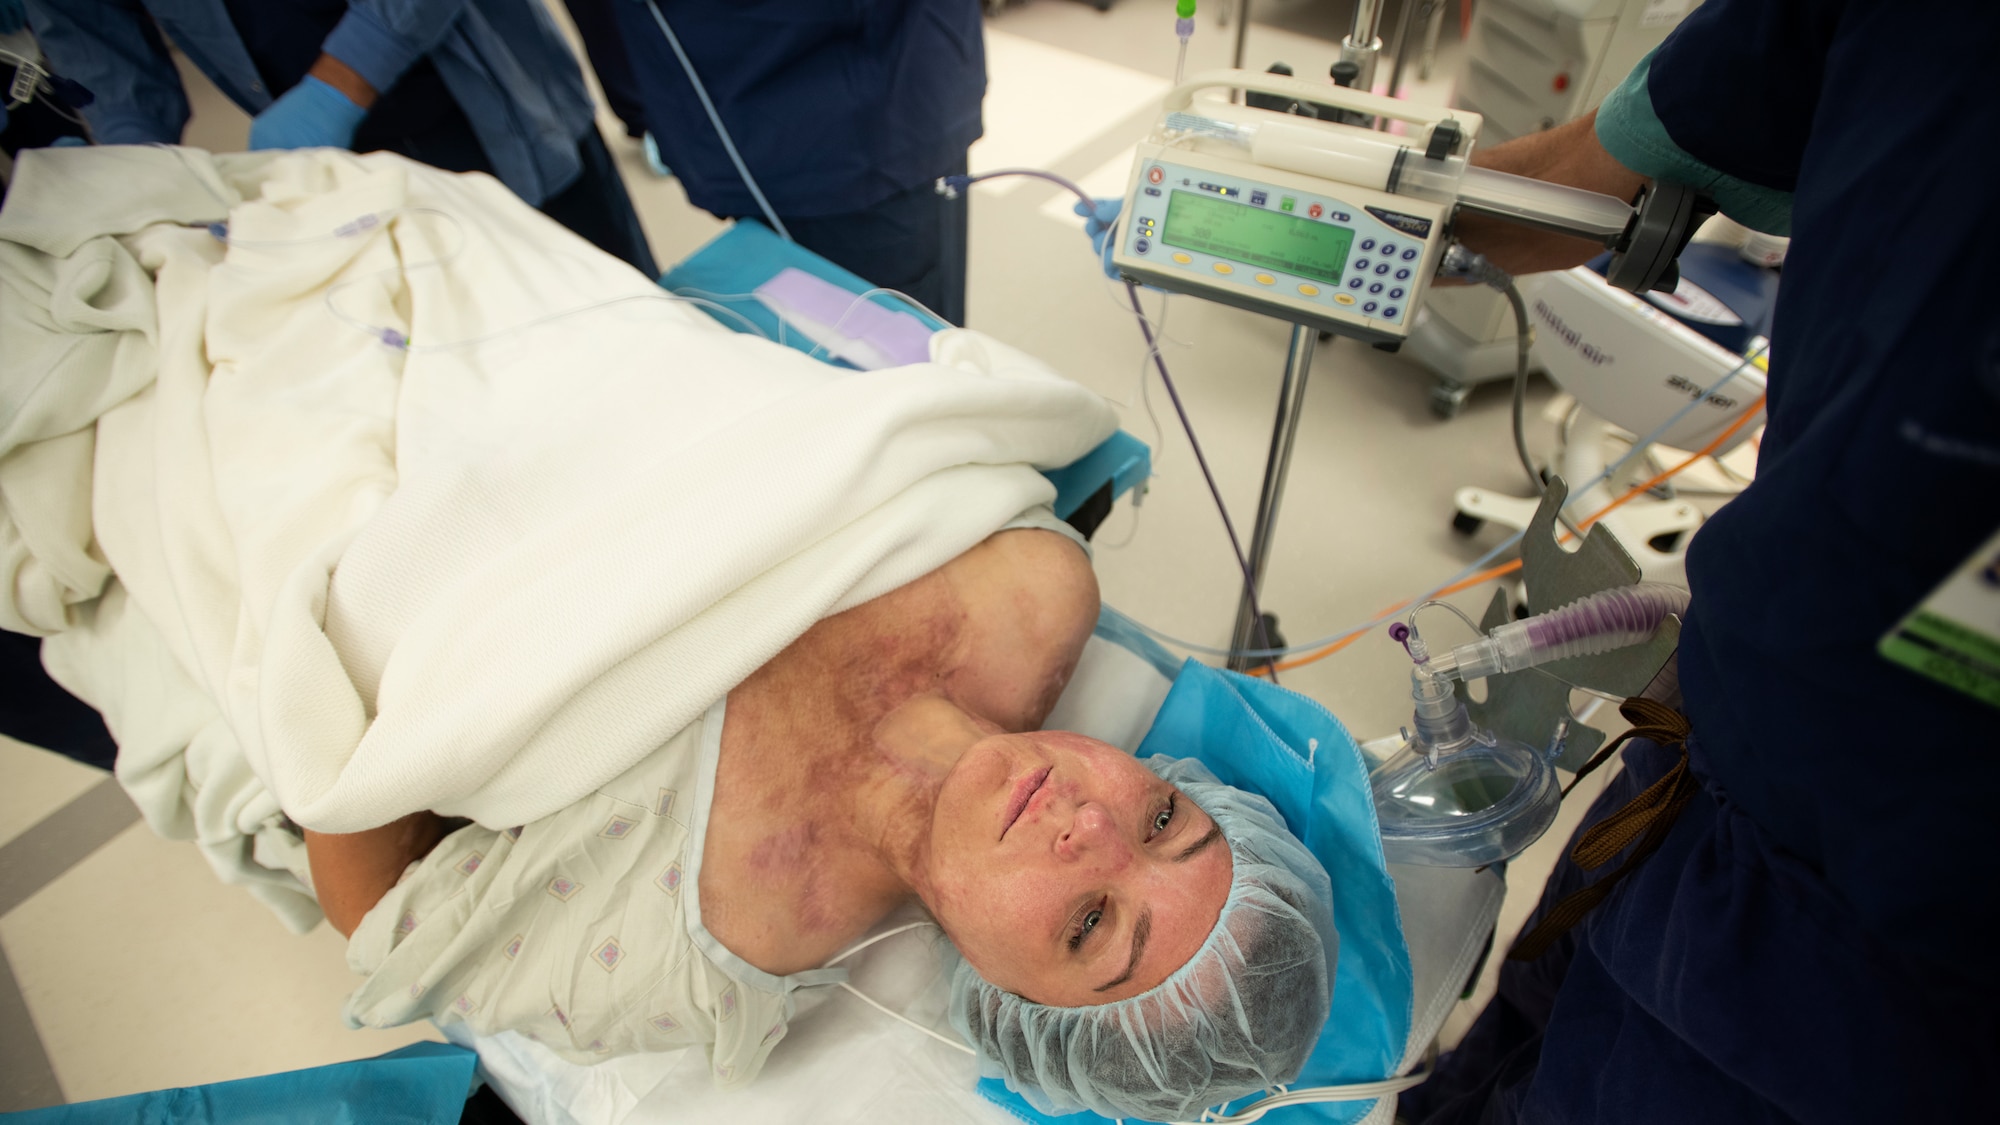 Burn scars are visible as retired U.S. Army Capt. Katie Blanchard awaits surgery